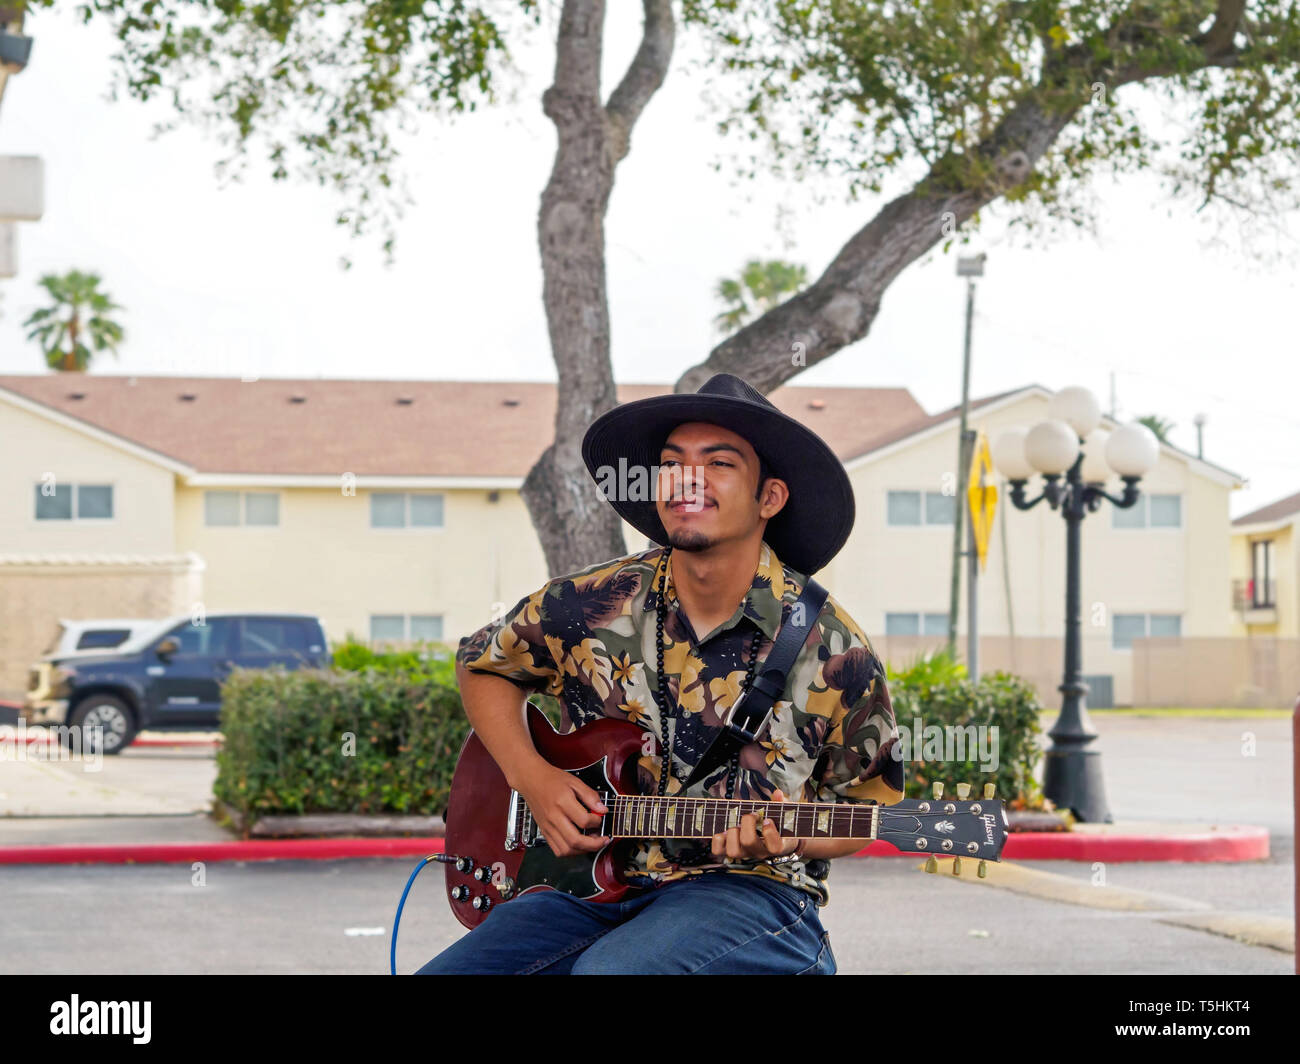 A handsome young man with dark complexion in a black, wide-brimmed hat plays an electric guitar at the Corpus Christi Southside Farmers' Market. Stock Photo